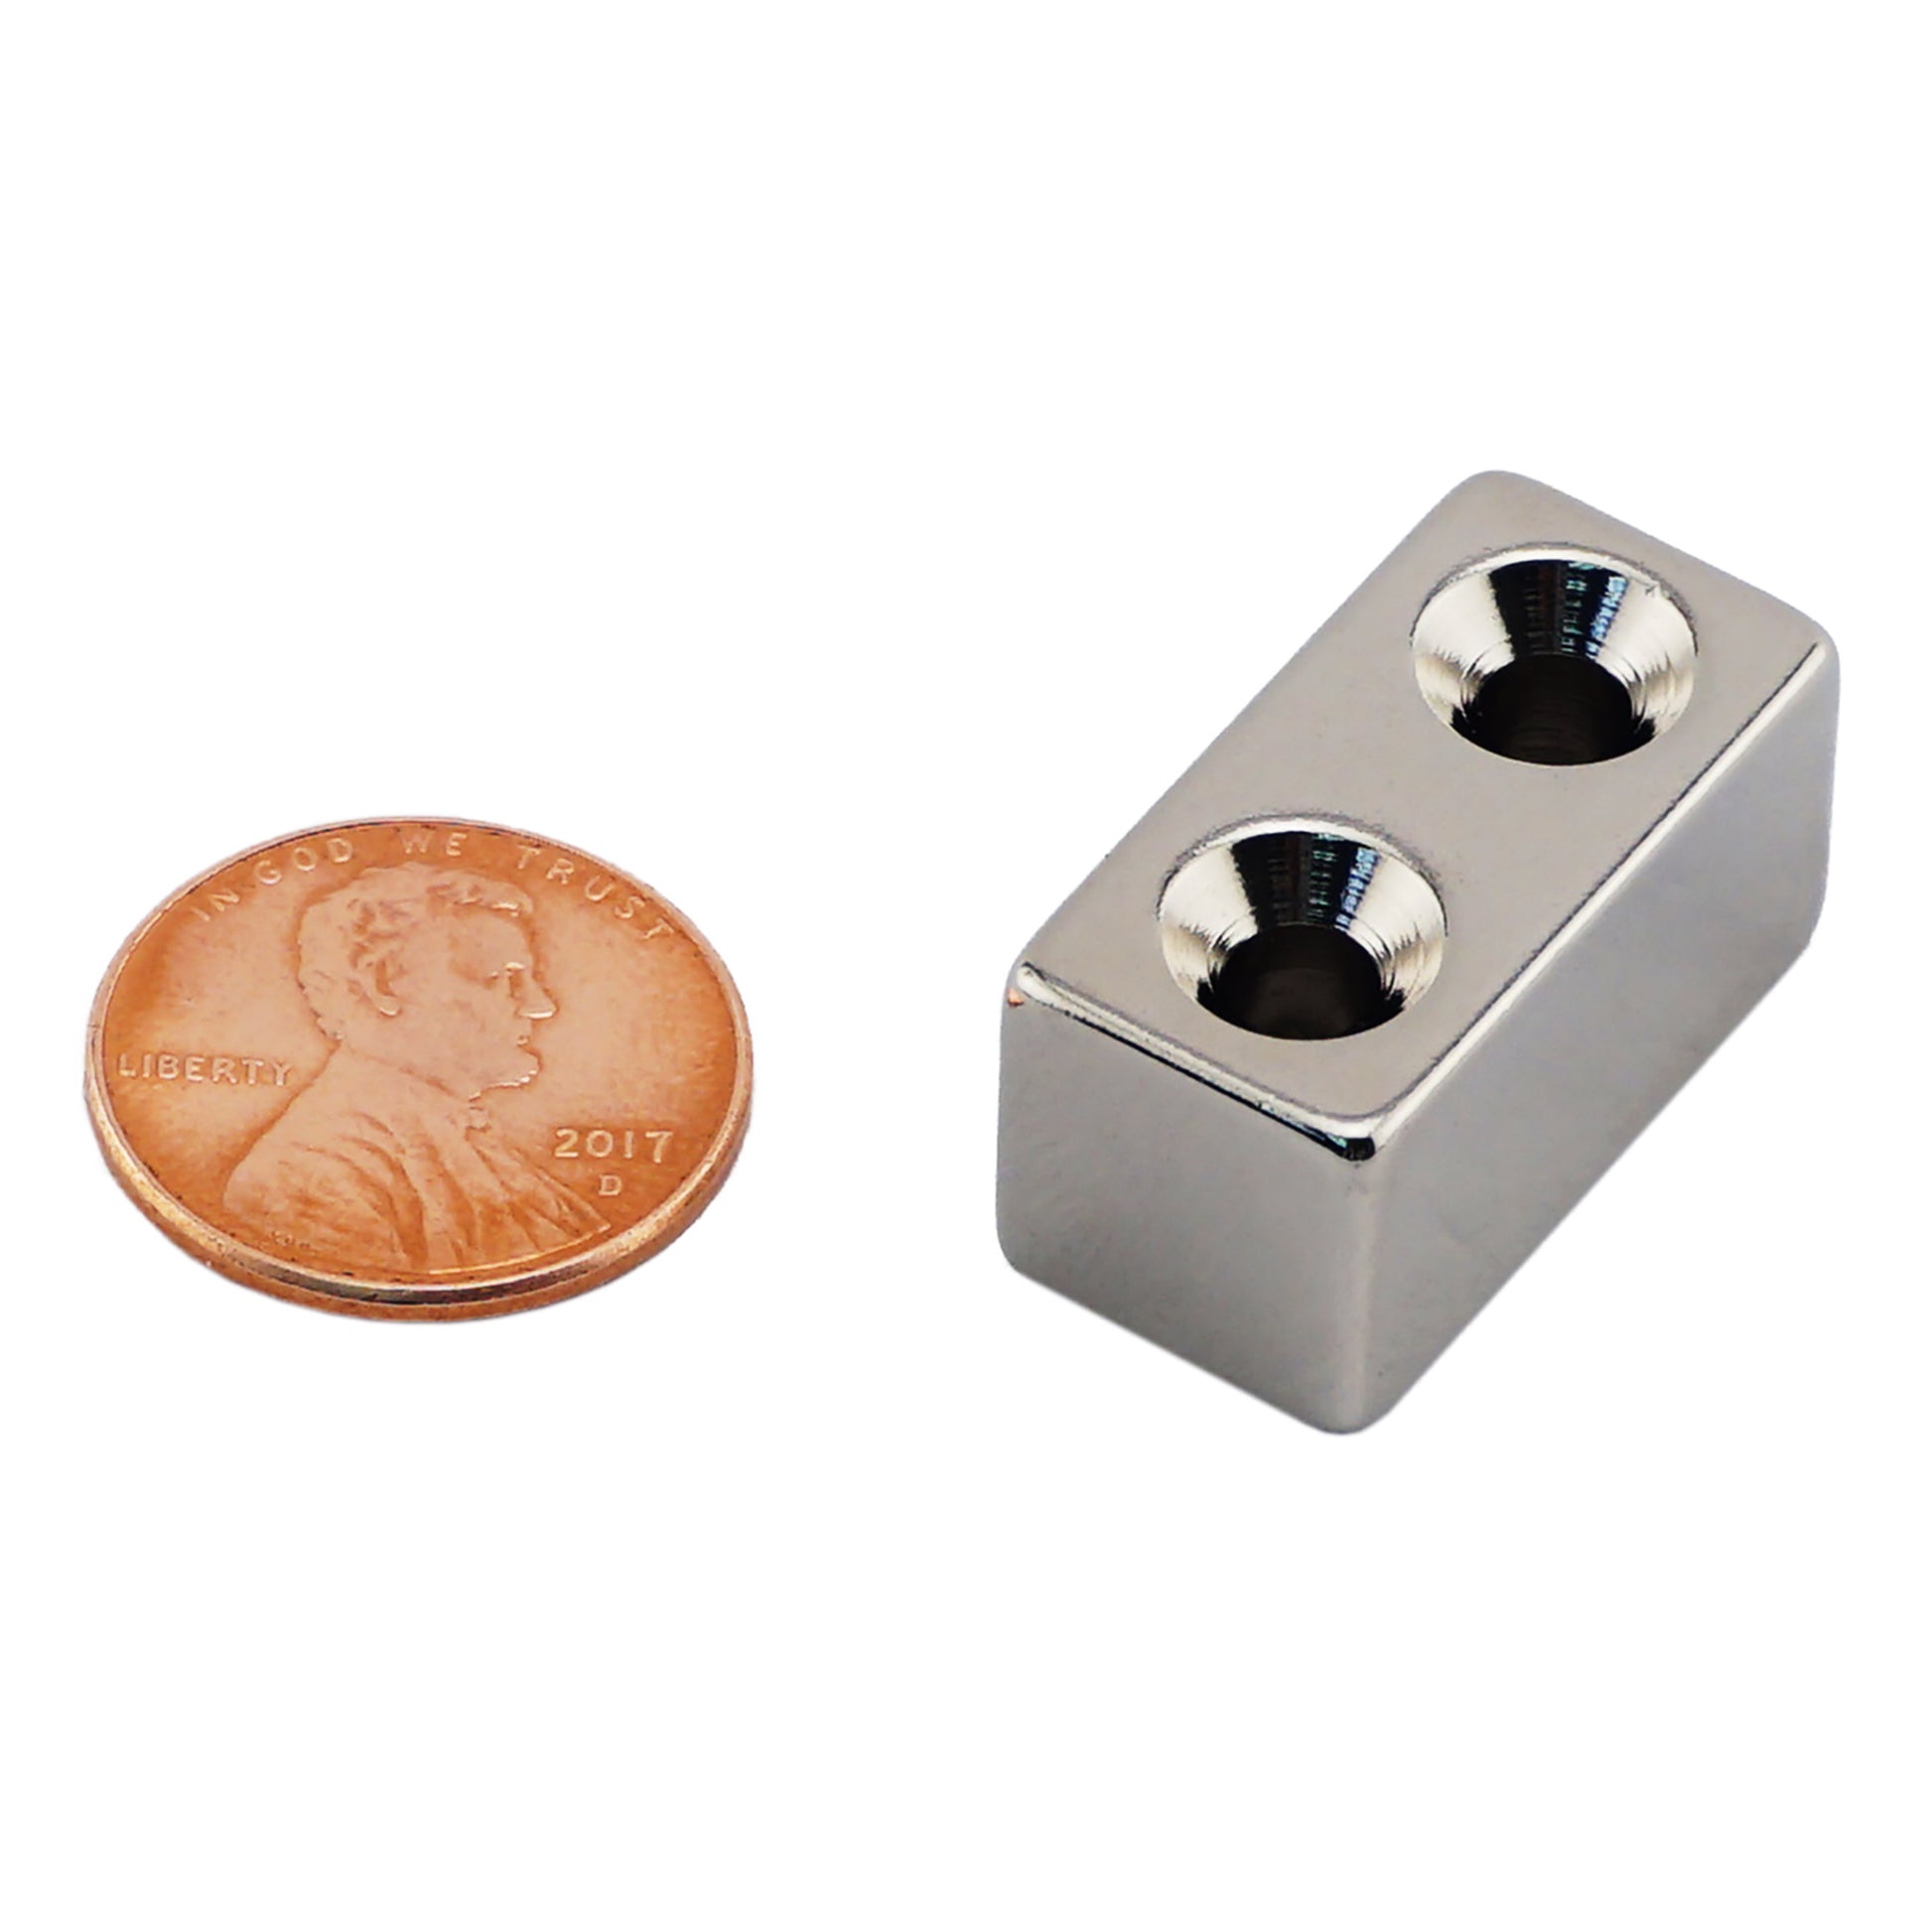 Load image into Gallery viewer, NB005056NCTSX2 Neodymium Countersunk Block Magnet - Compared to Penny for Size Reference